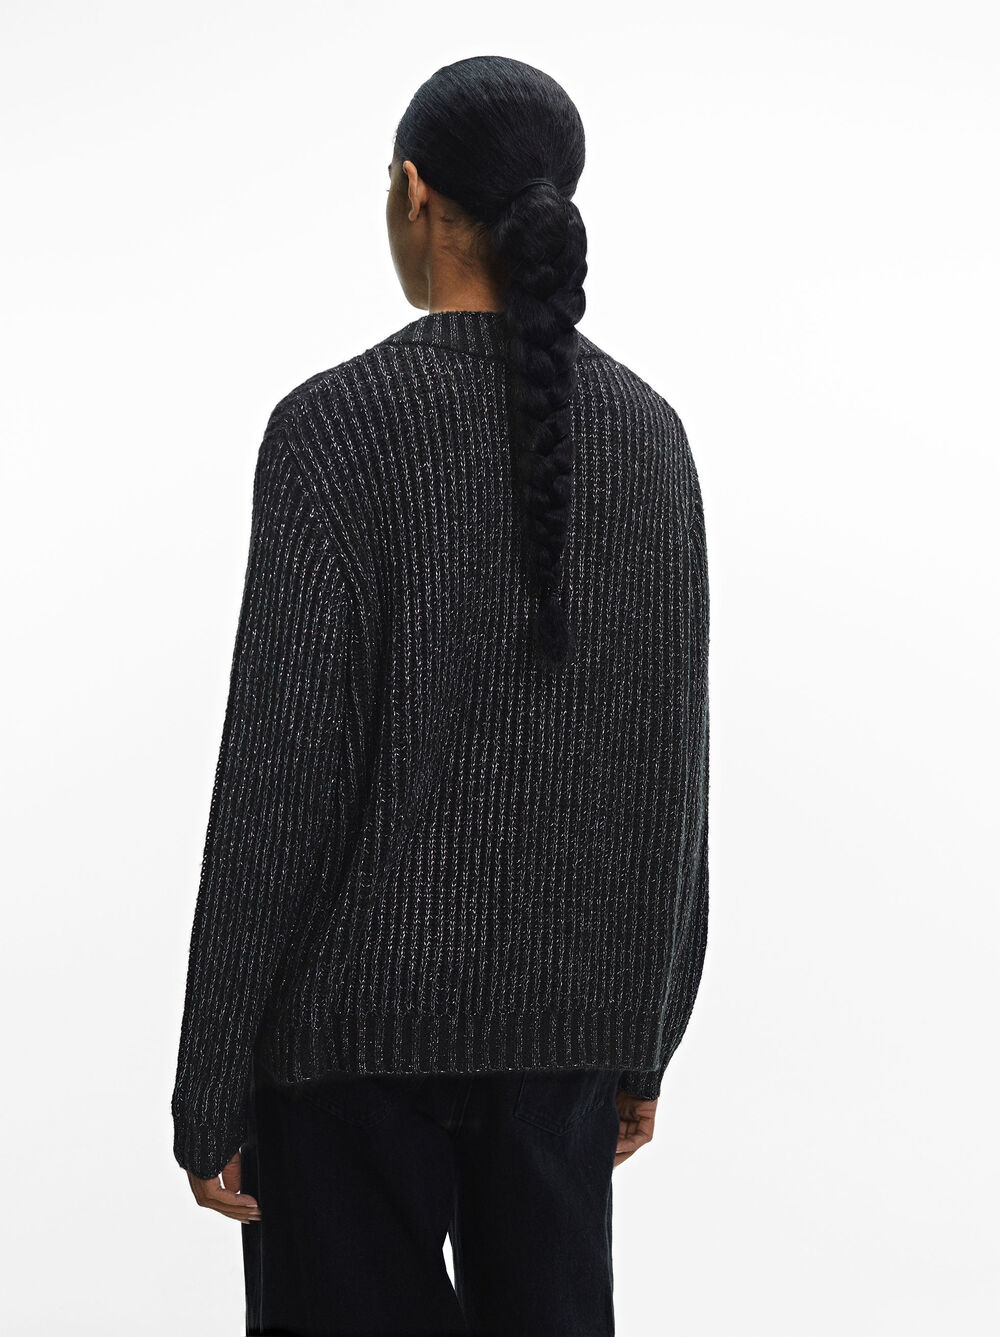 Knit Sweater With Wool